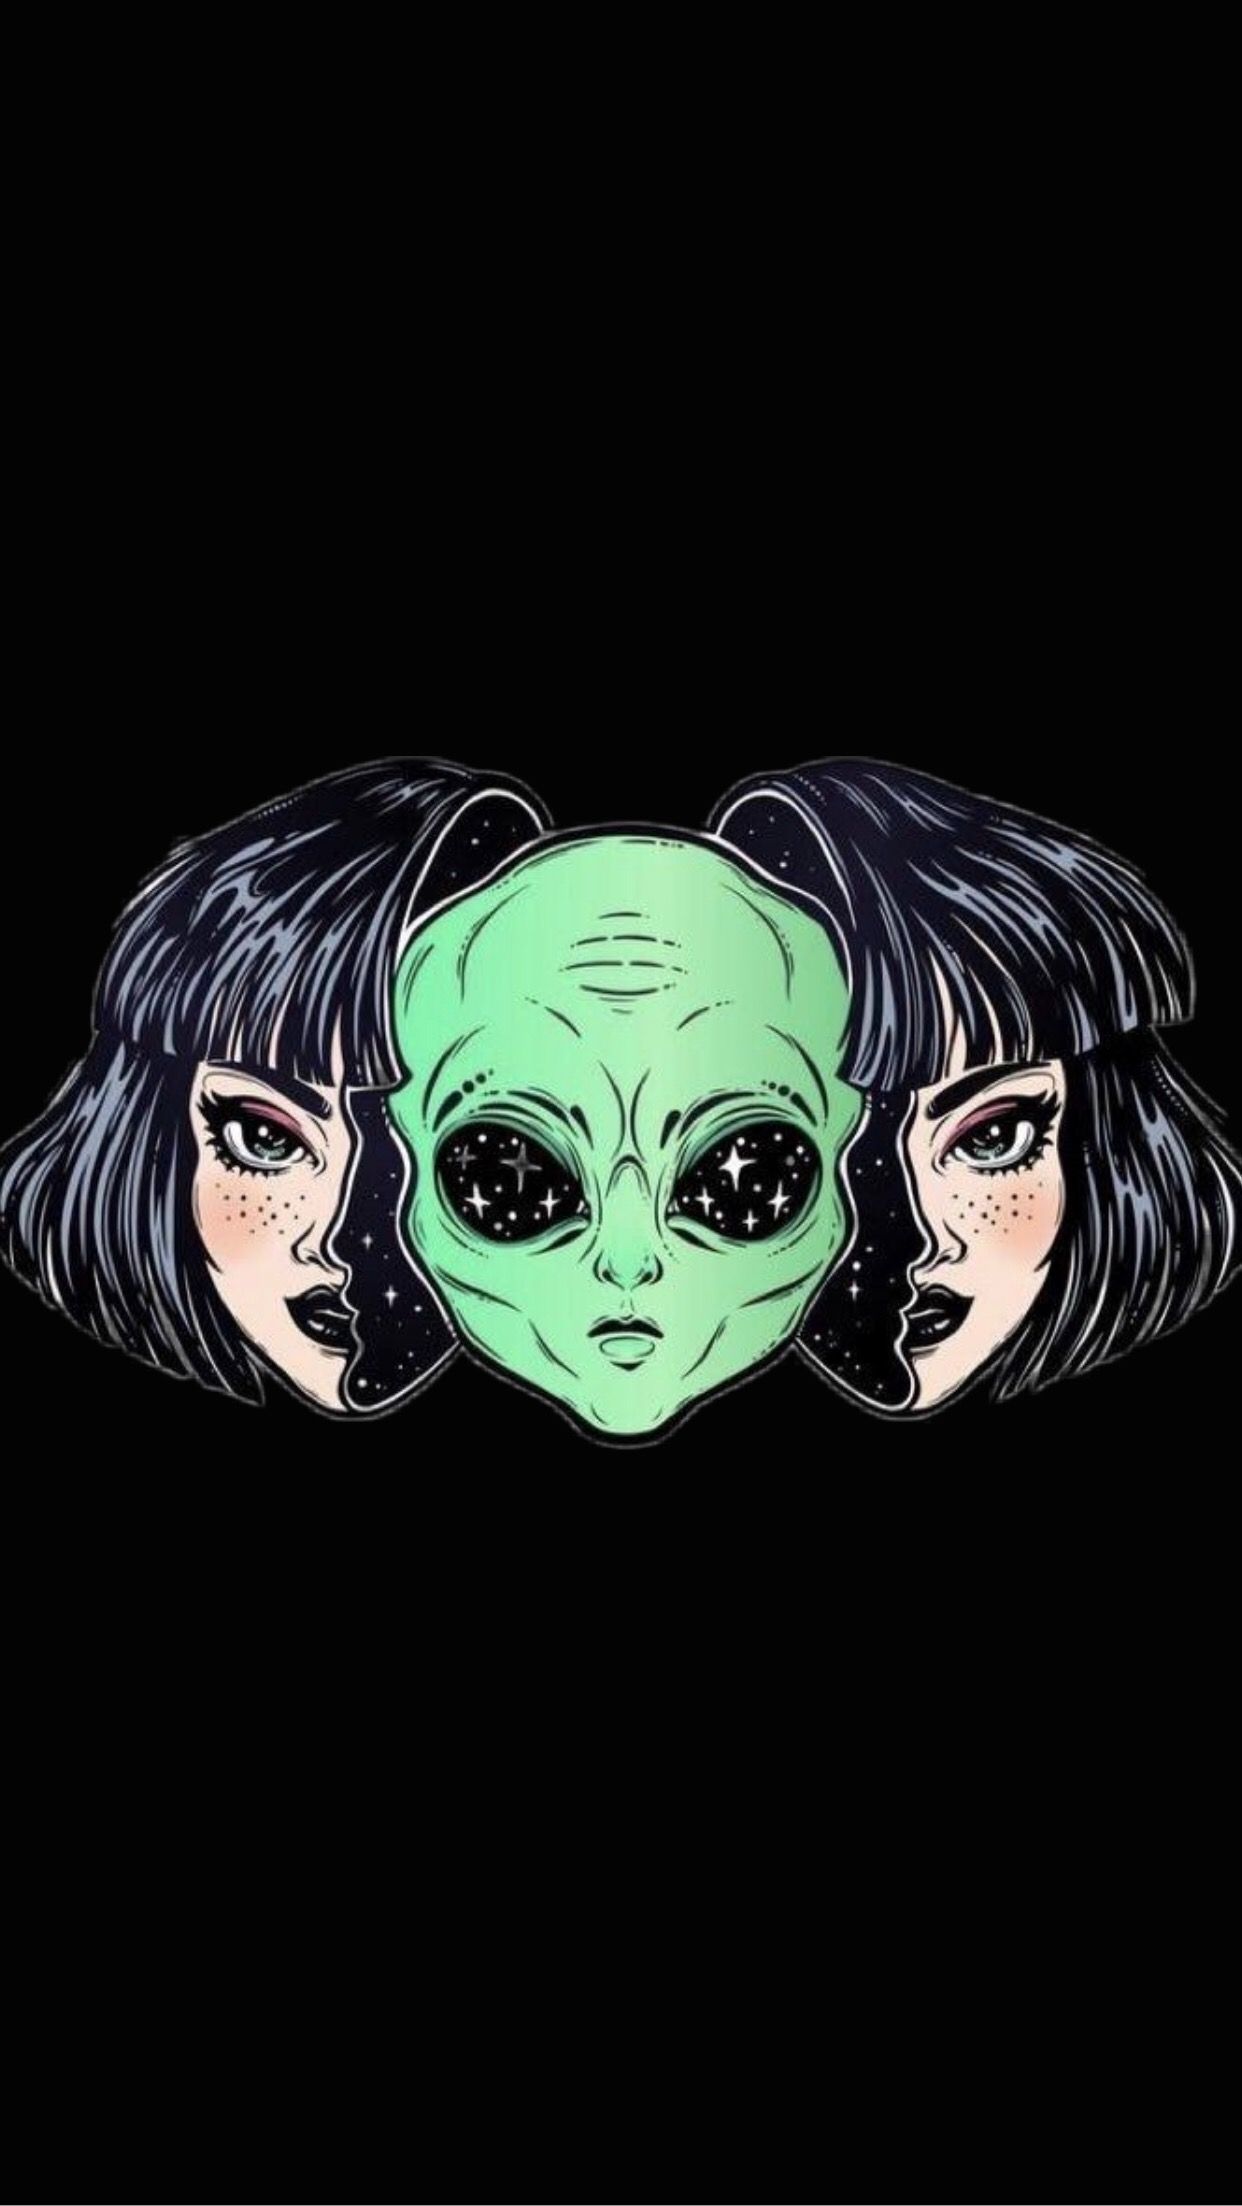 Aesthetic phone wallpaper of an alien with two women's faces on either side of it - Creepy